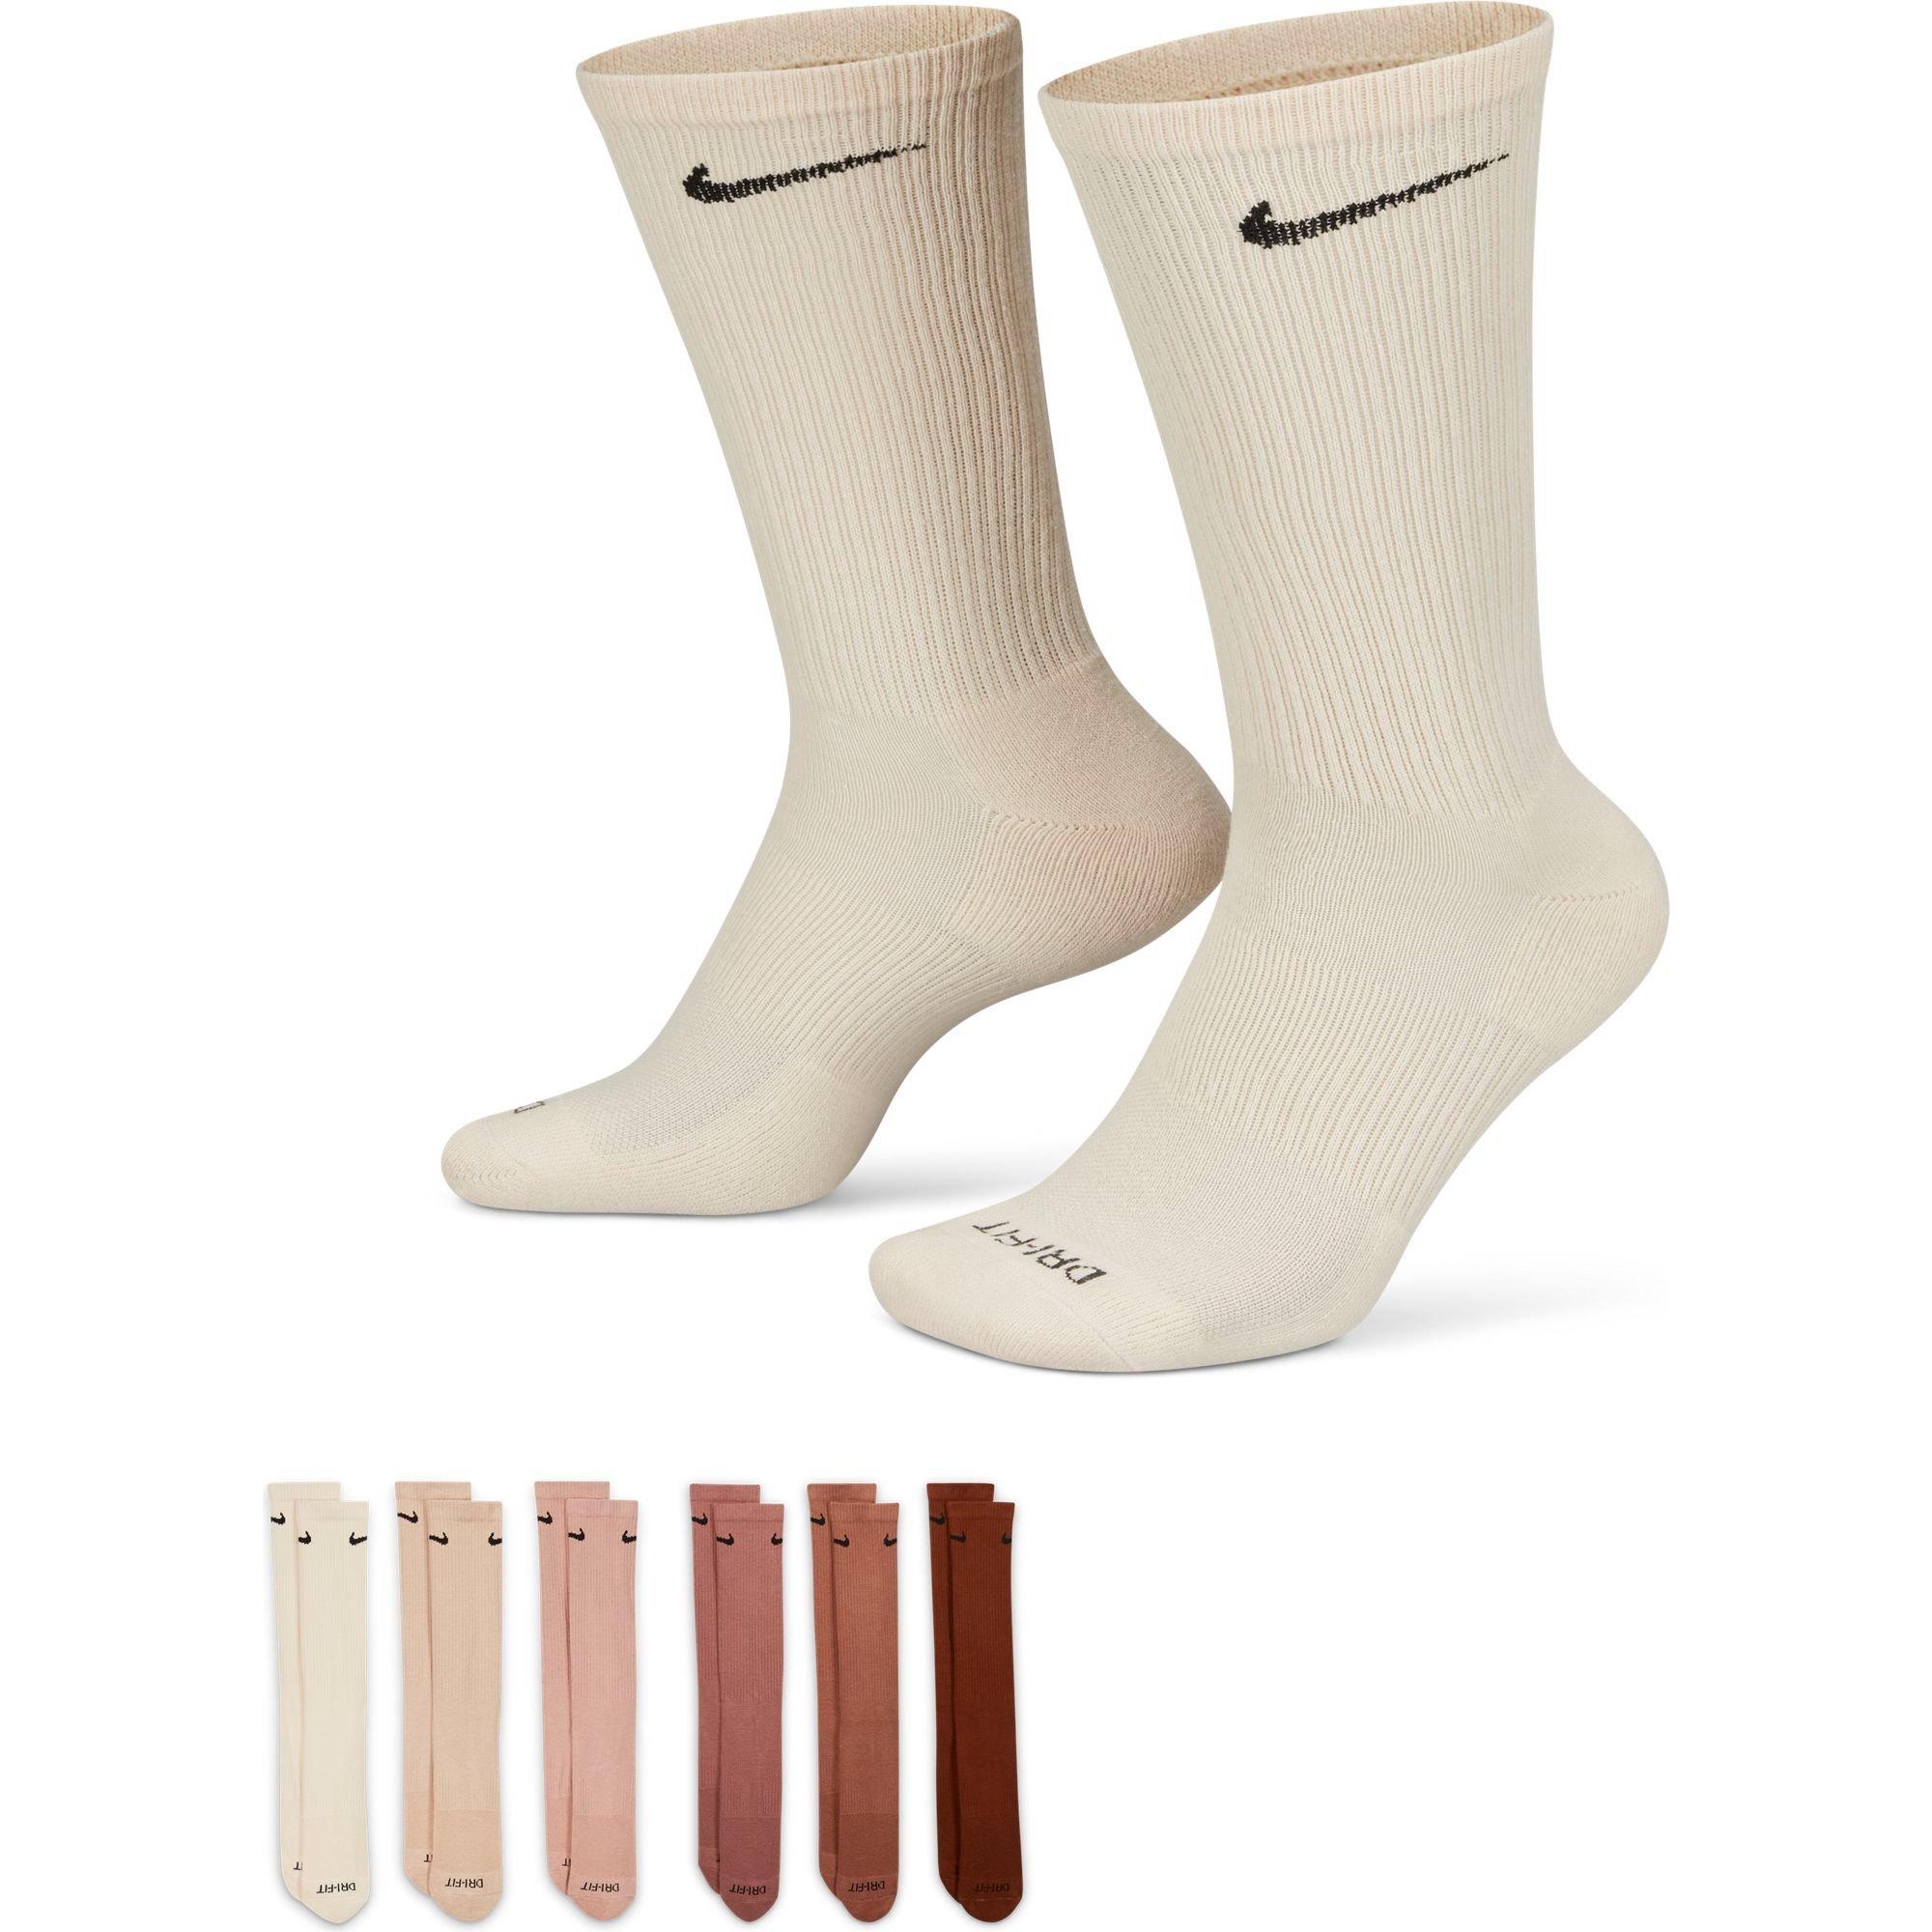 Outbound Women's Athletic Quarter-Crew Socks with Cushioned Sole, 6-pk,  Assorted Colours